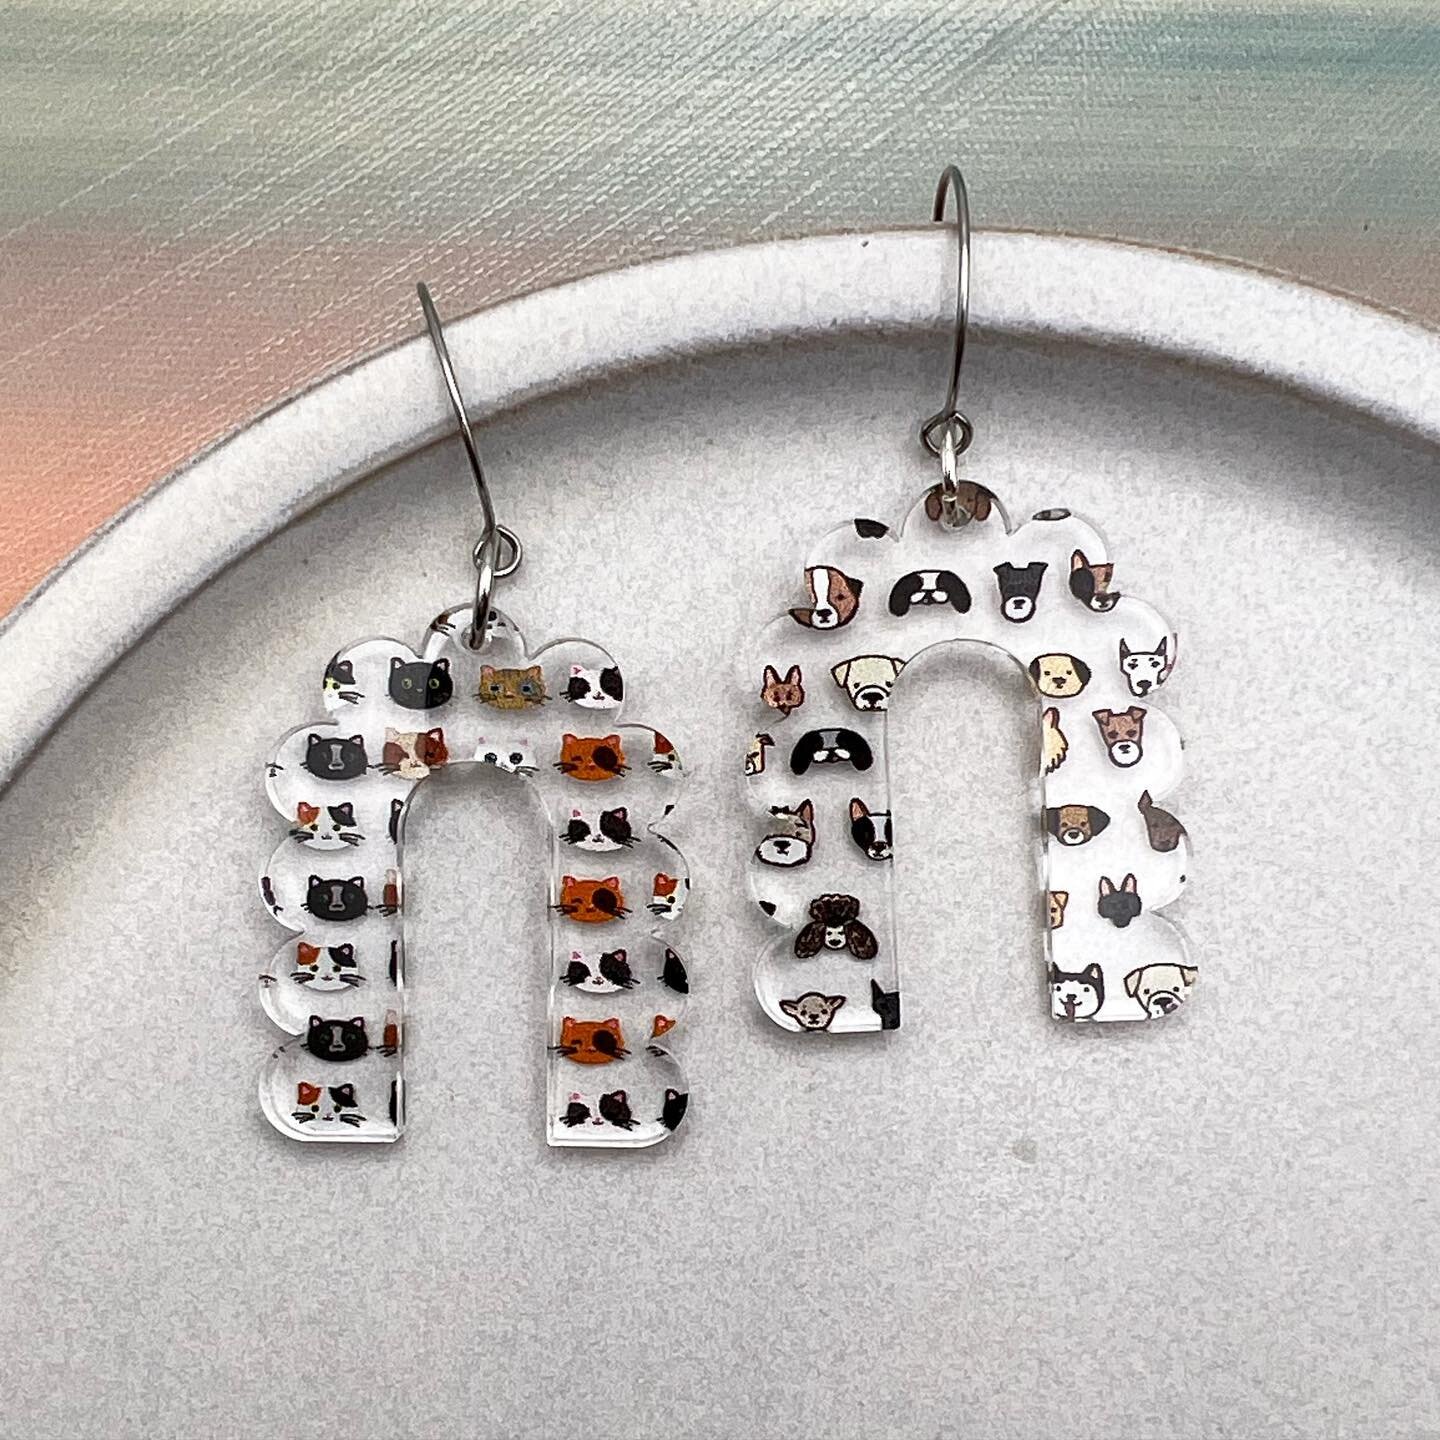 Oh-em-gee! I cannot get over how cute these dog and cat earrings turned out. Available this weekend at Art-A-Whirl - I&rsquo;ll be at @2010artblok on Friday, Saturday, and Sunday. Come see them in person! 
#mnartists #mnartist #handmadejewelry #laser